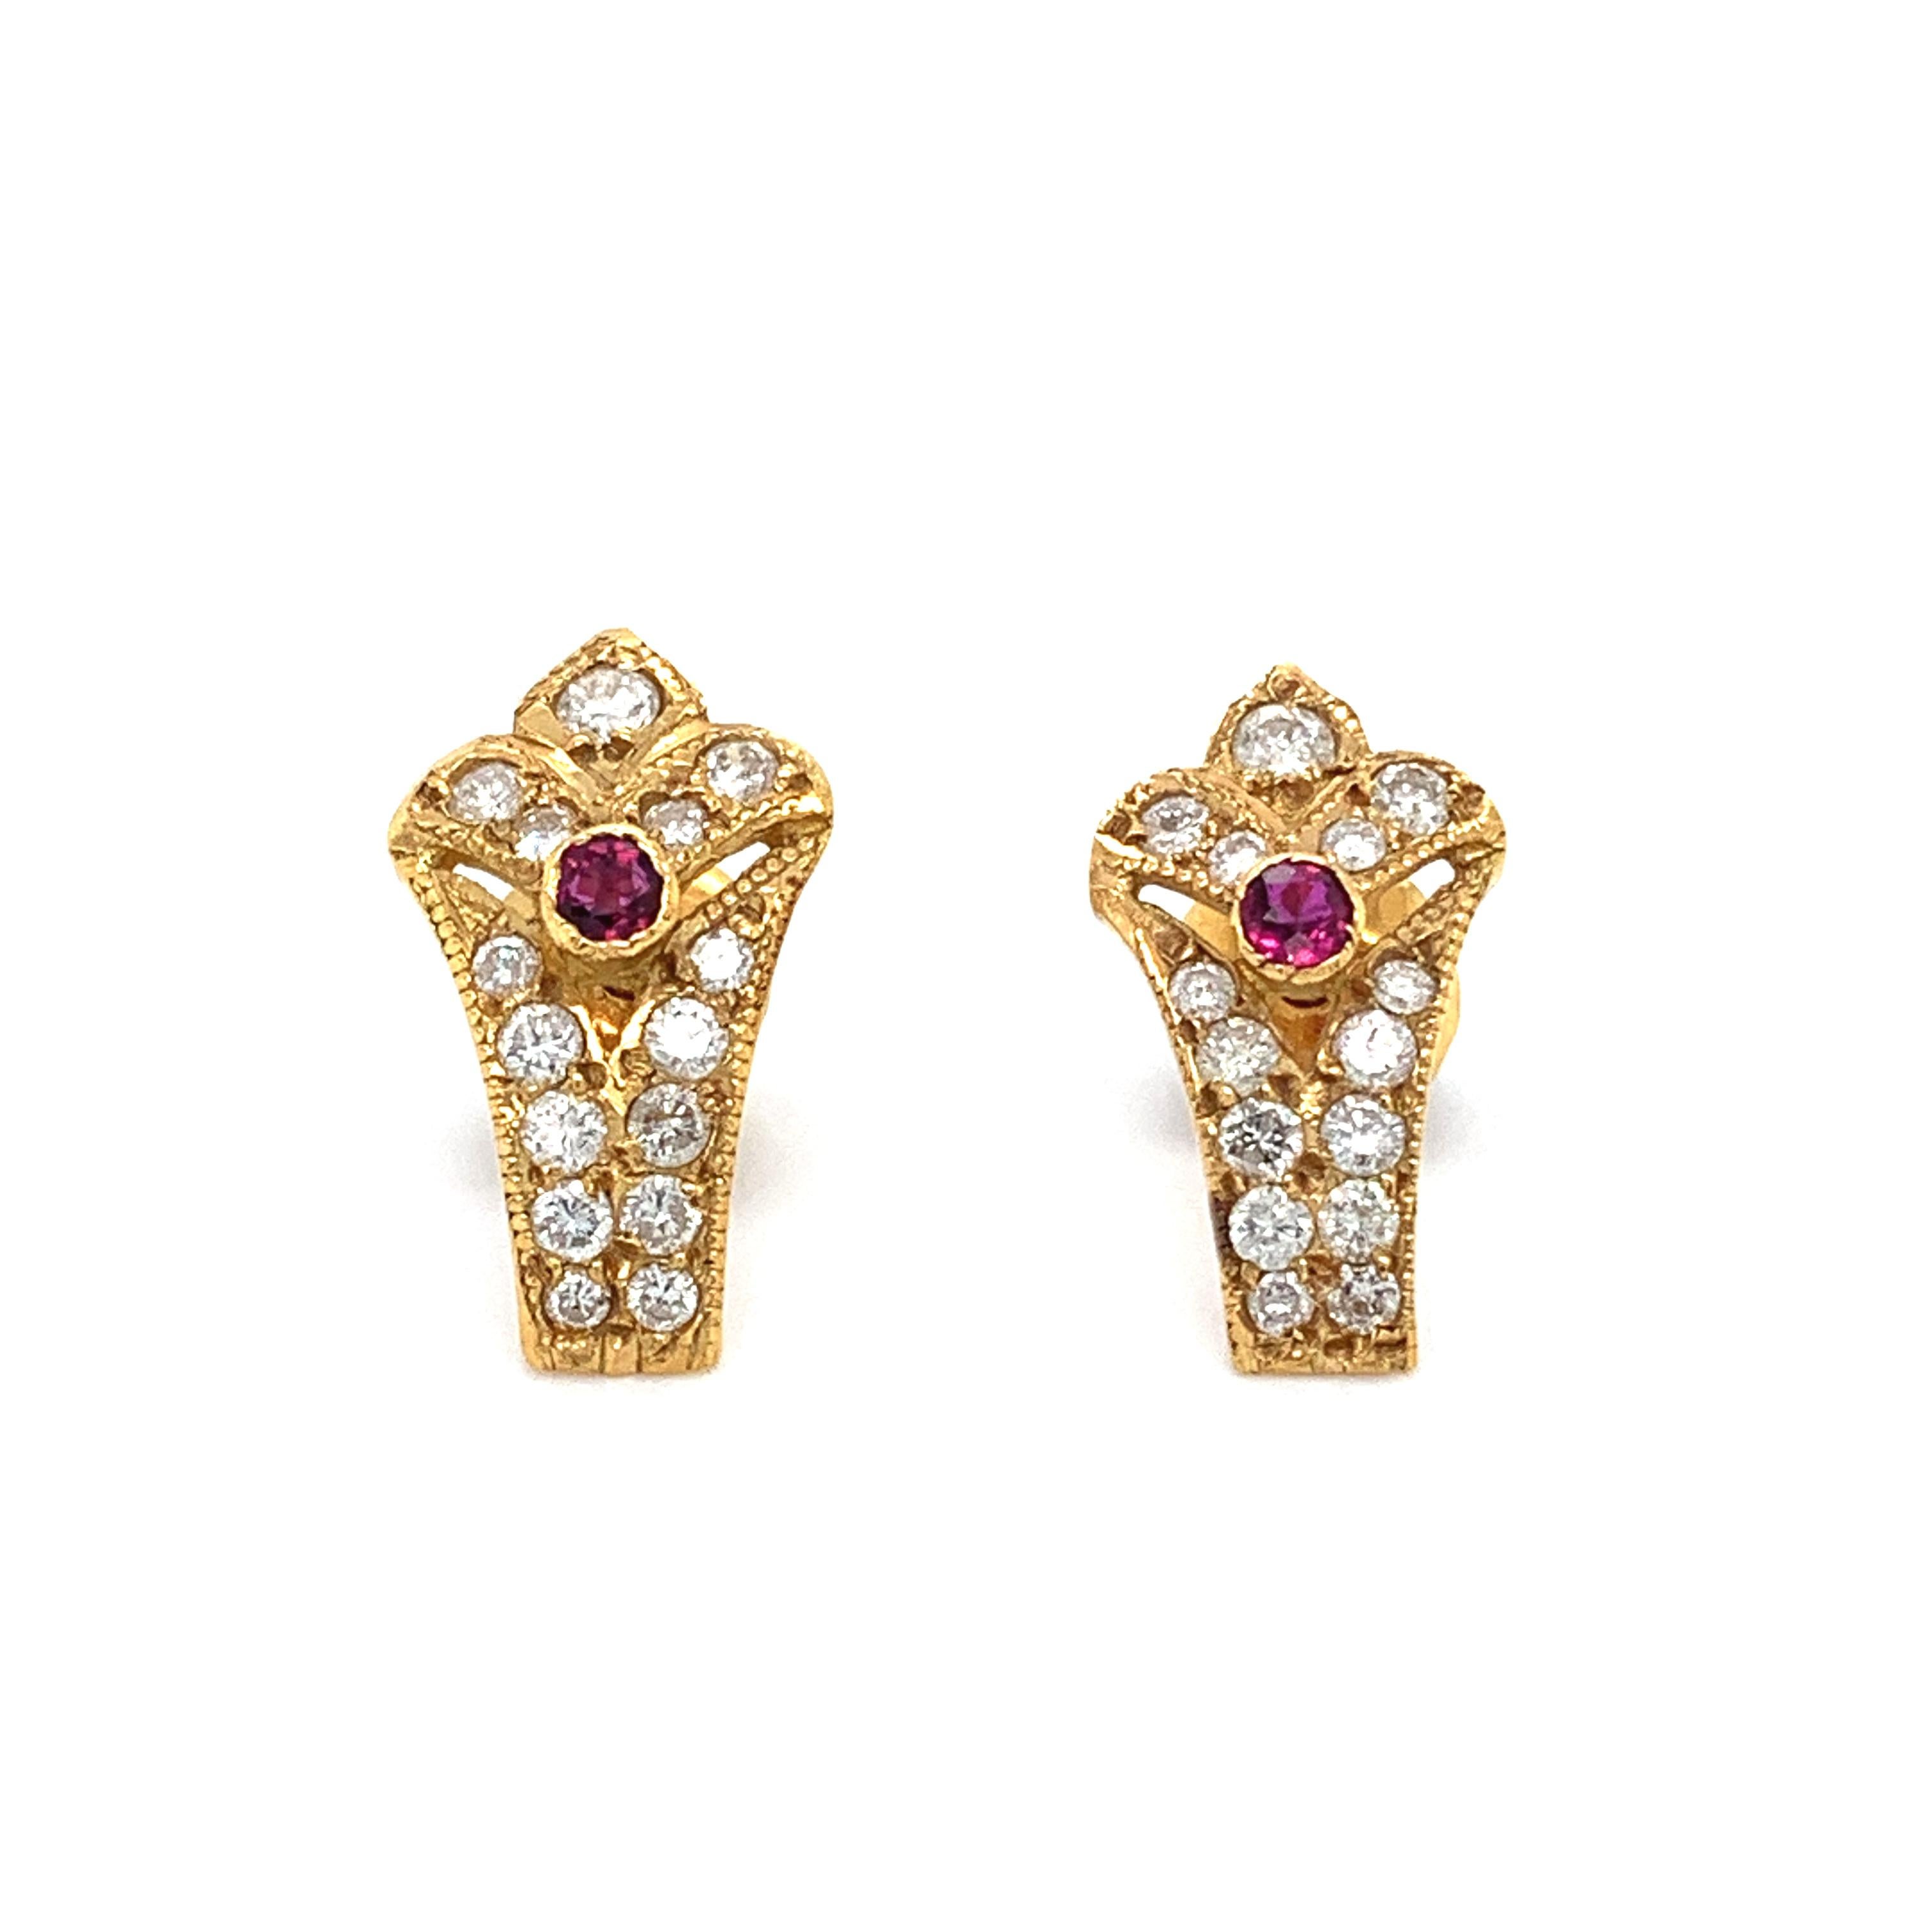 Round Cut Ruby diamonds art deco studs earrings 18k yellow gold For Sale